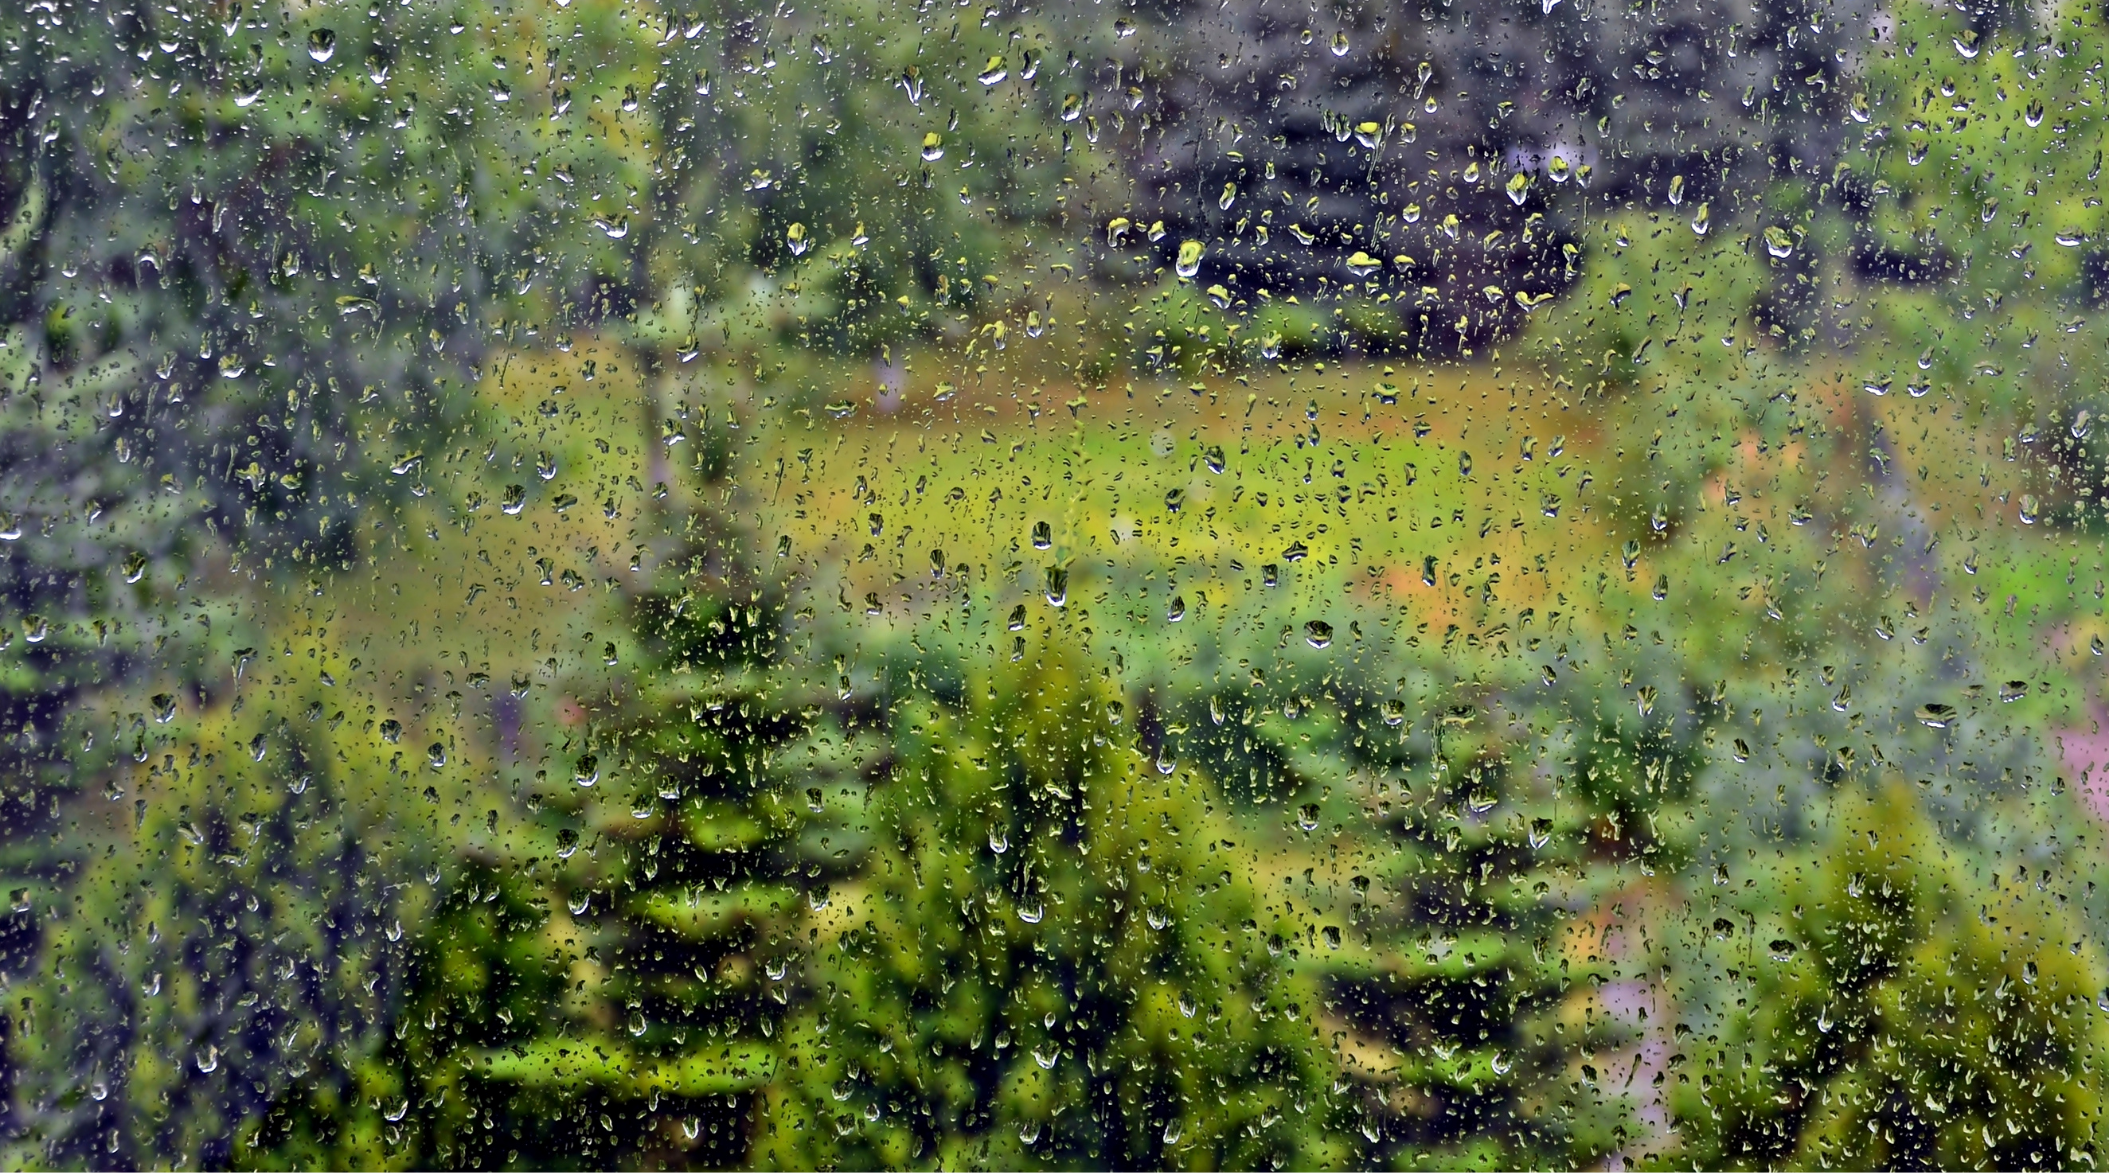 blurred view of the outdoors through a rain speckled window in ny state